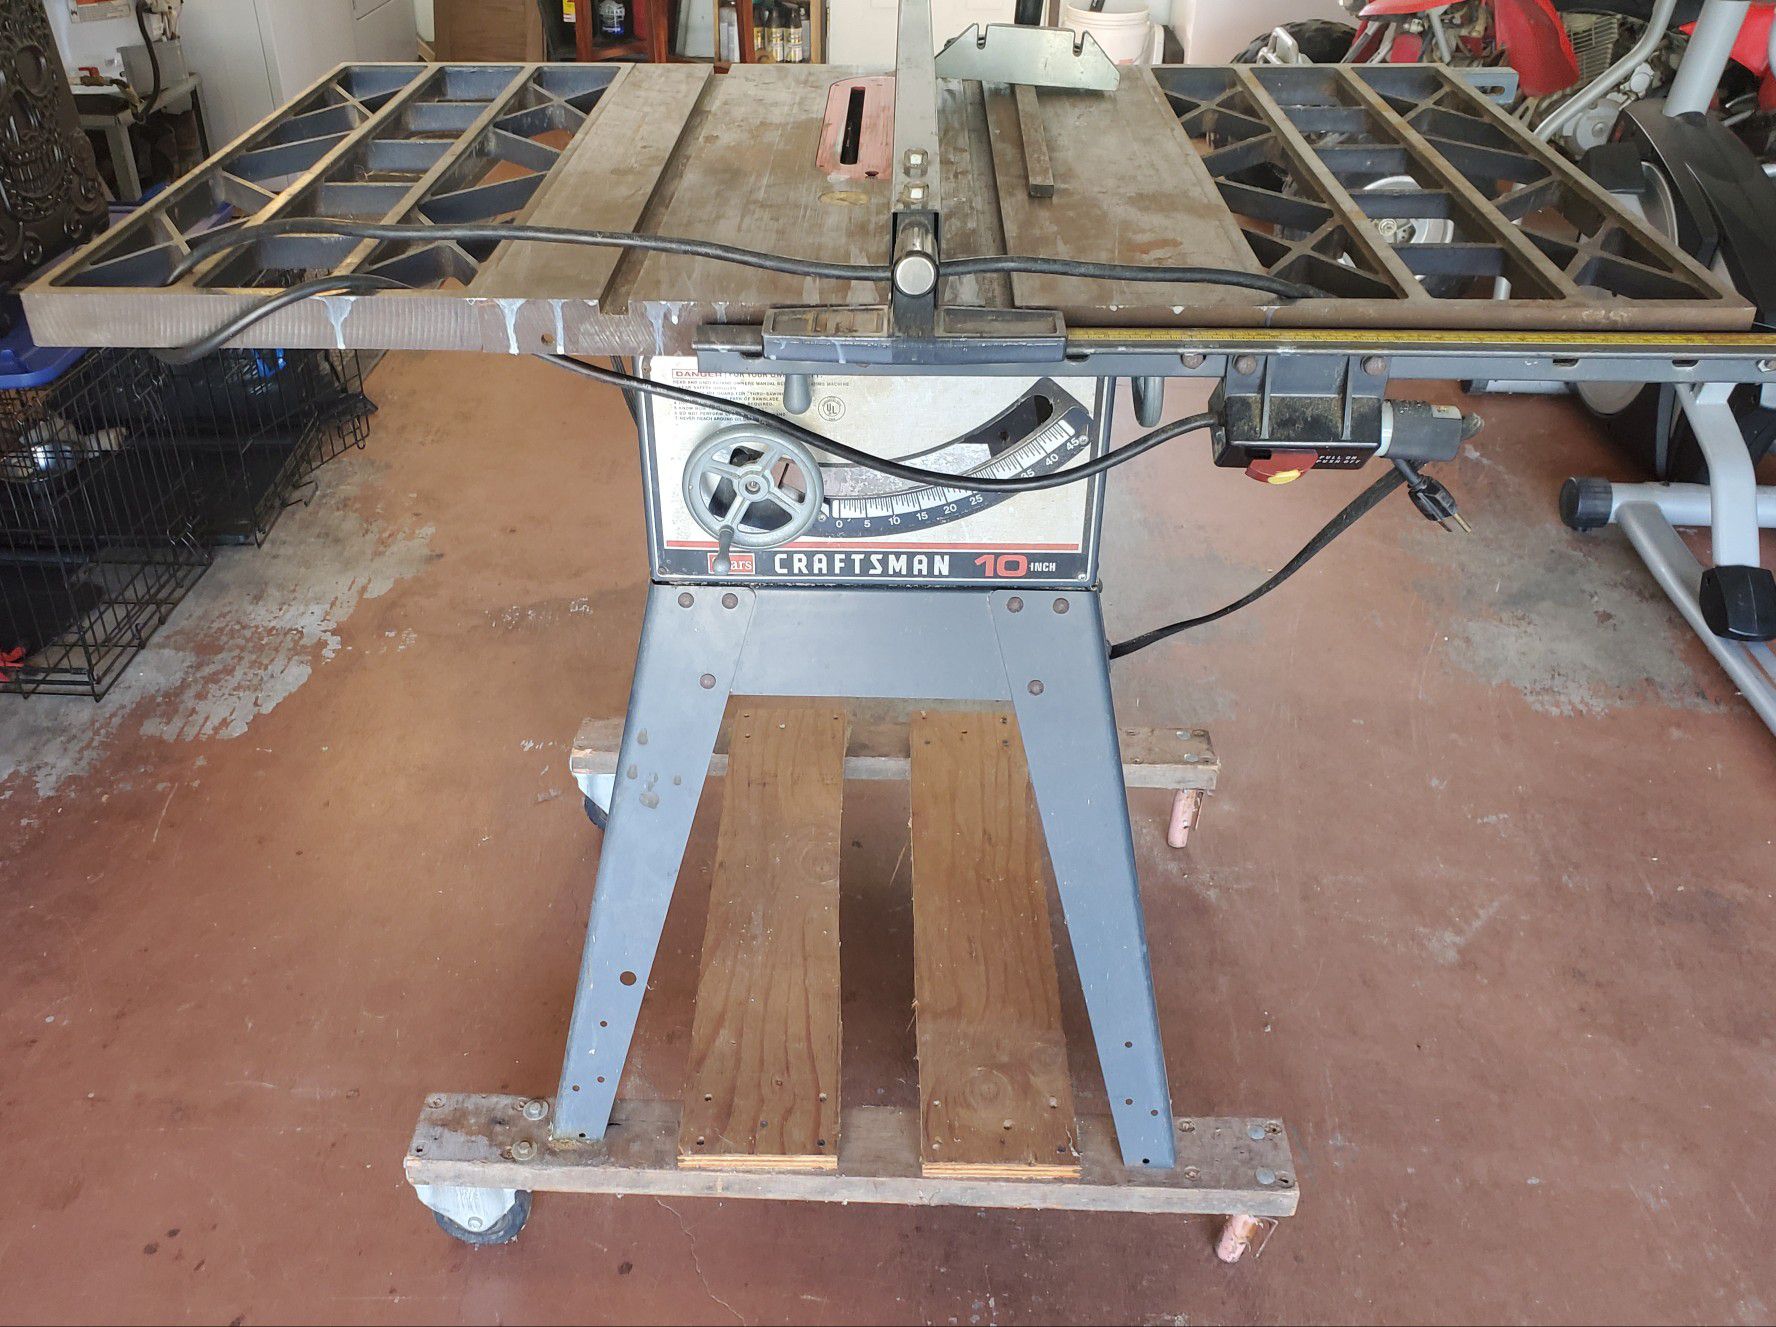 Craftsman 10 inch Table Saw